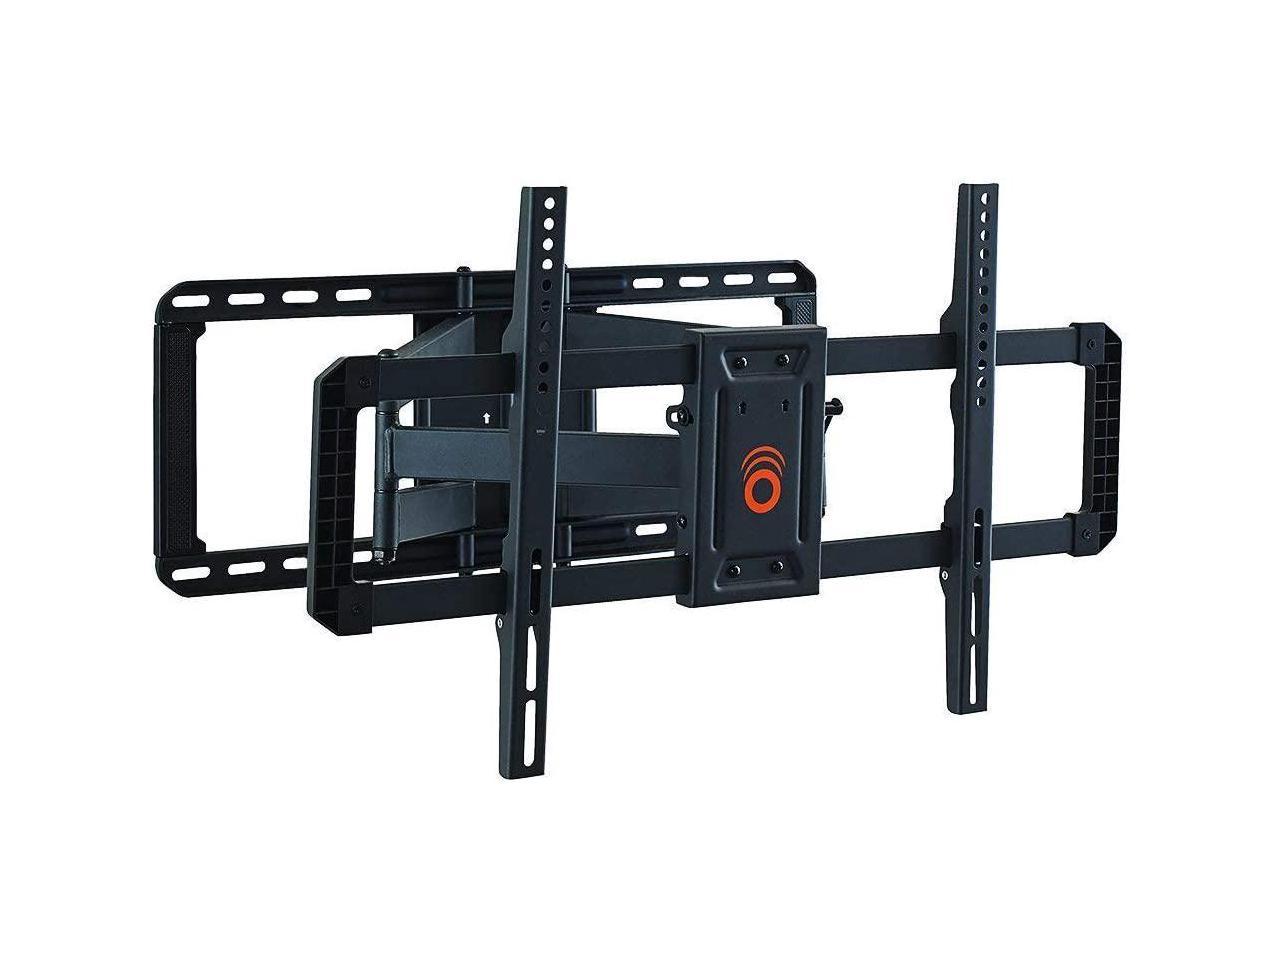 ECHOGEAR Full Motion TV Wall Mount for Big TVs Up to 90